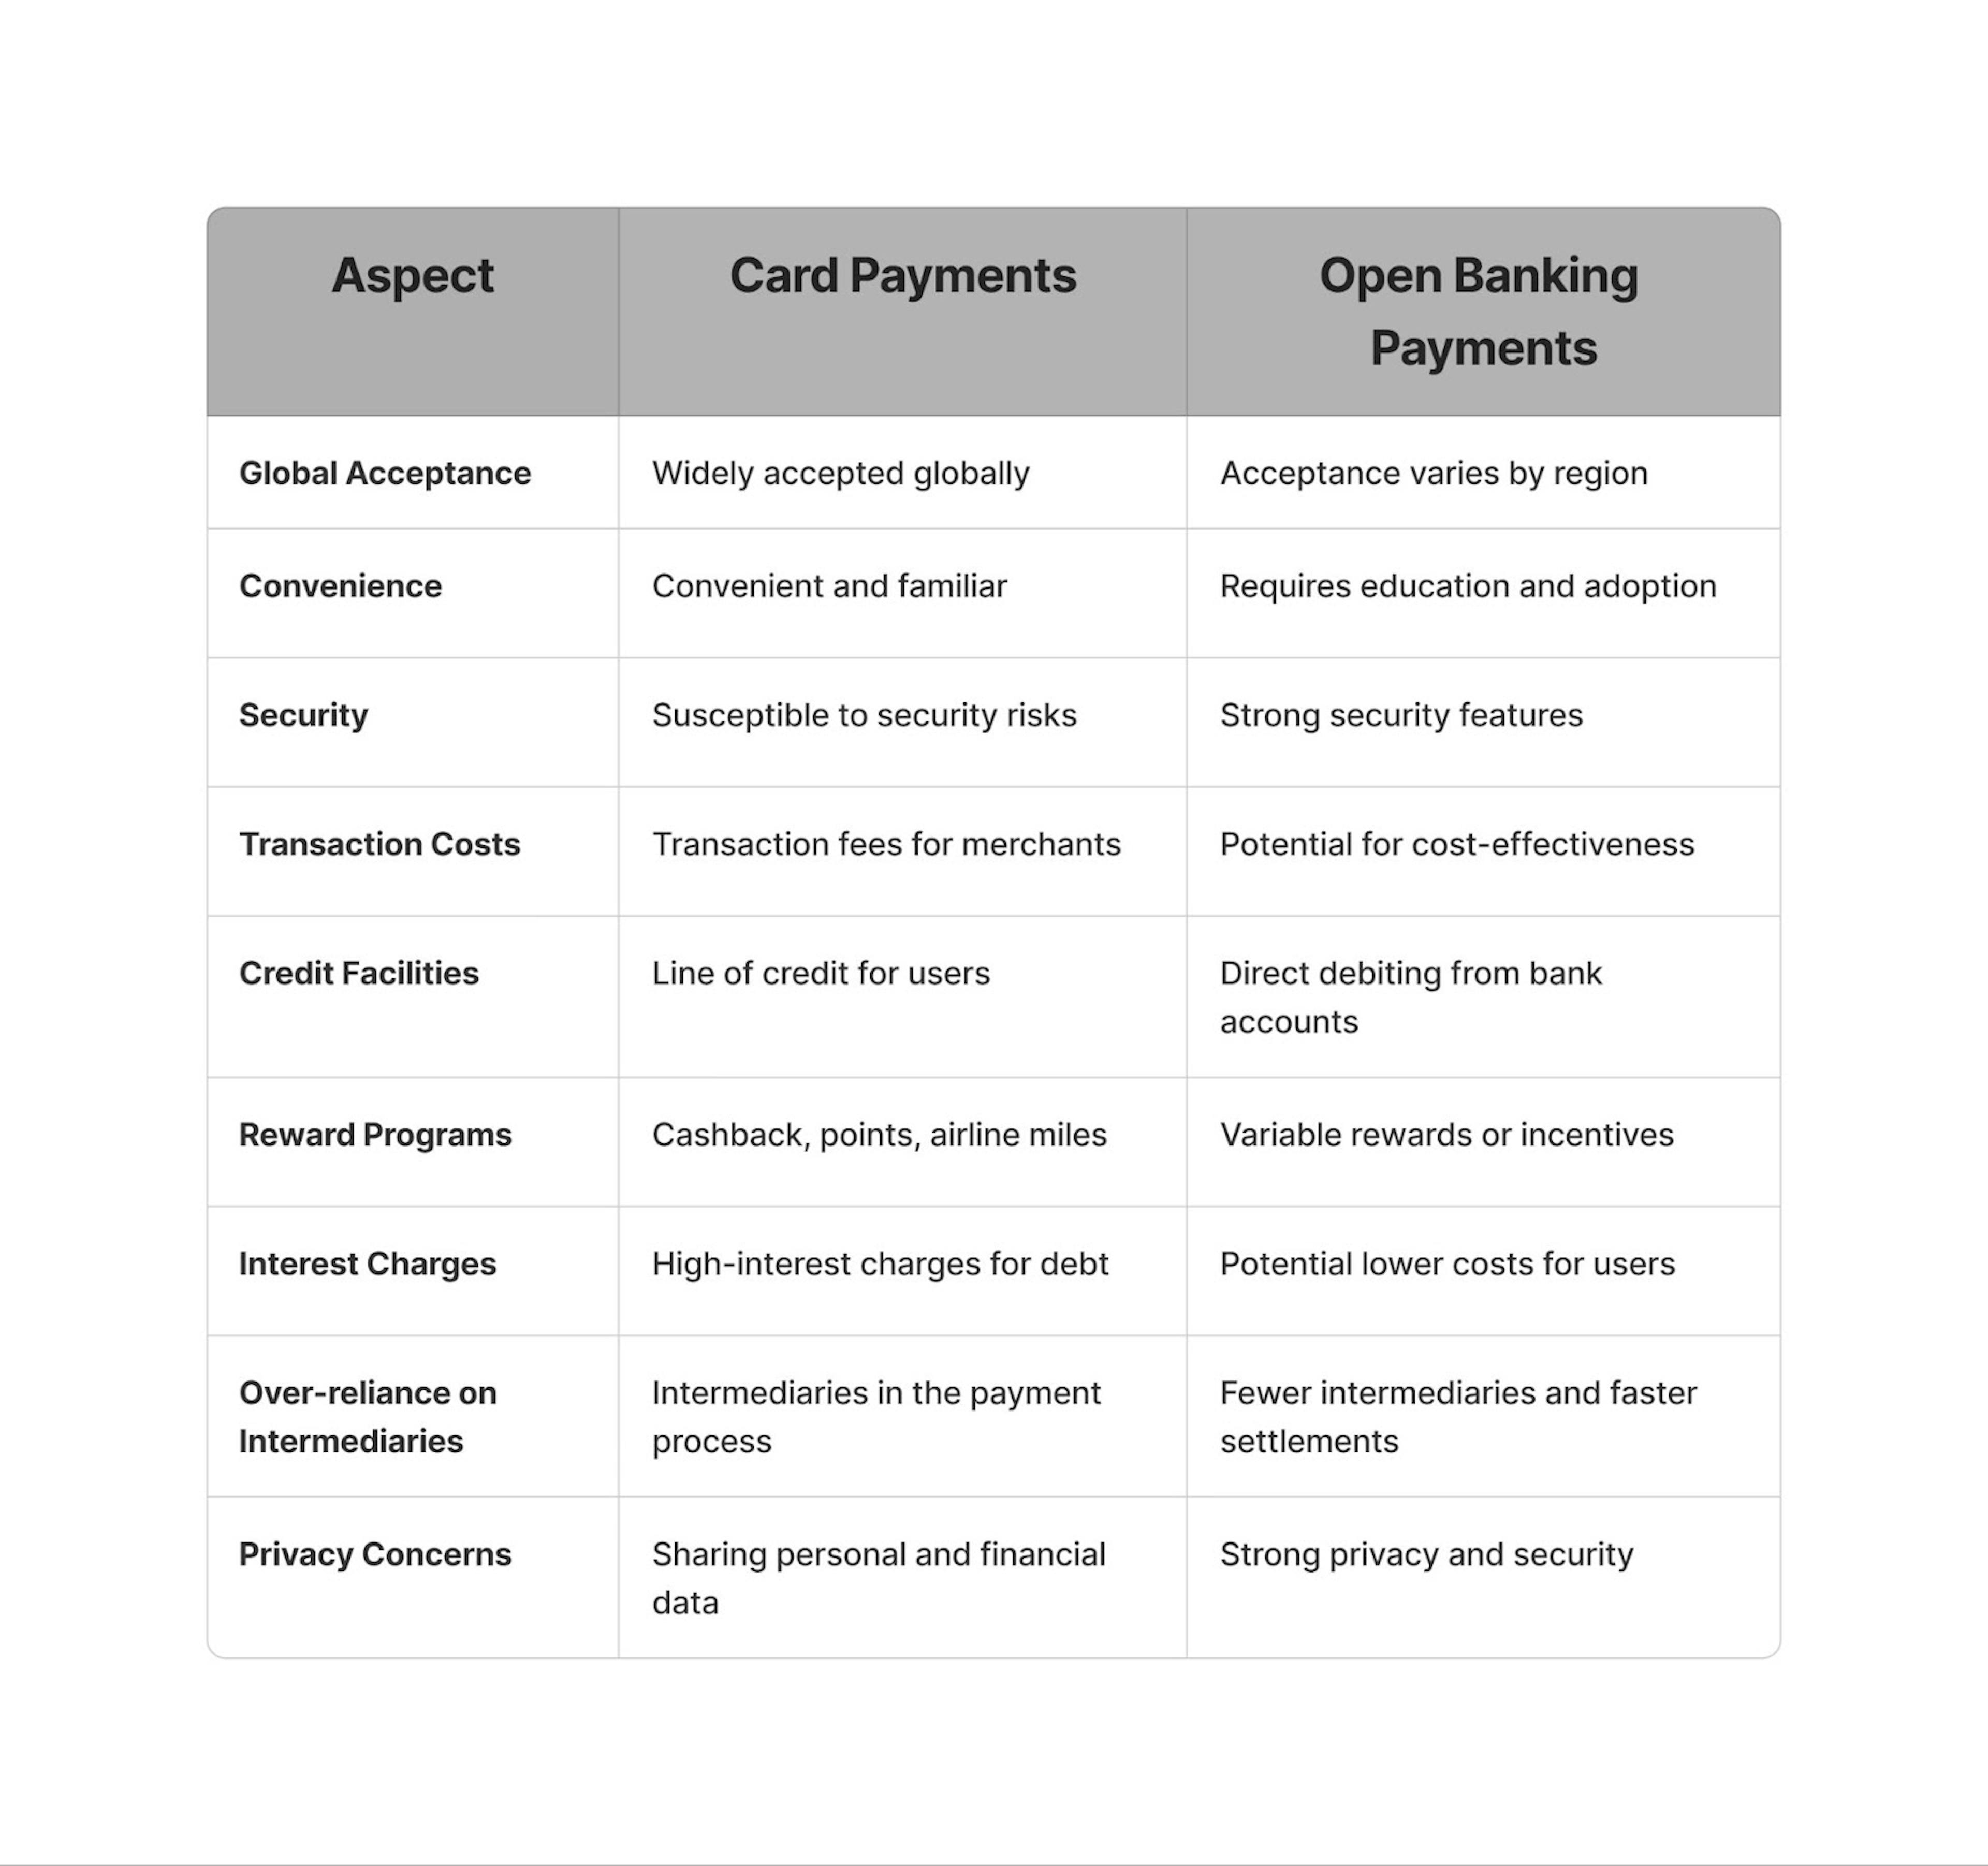 Card Payments vs Open Banking Payments